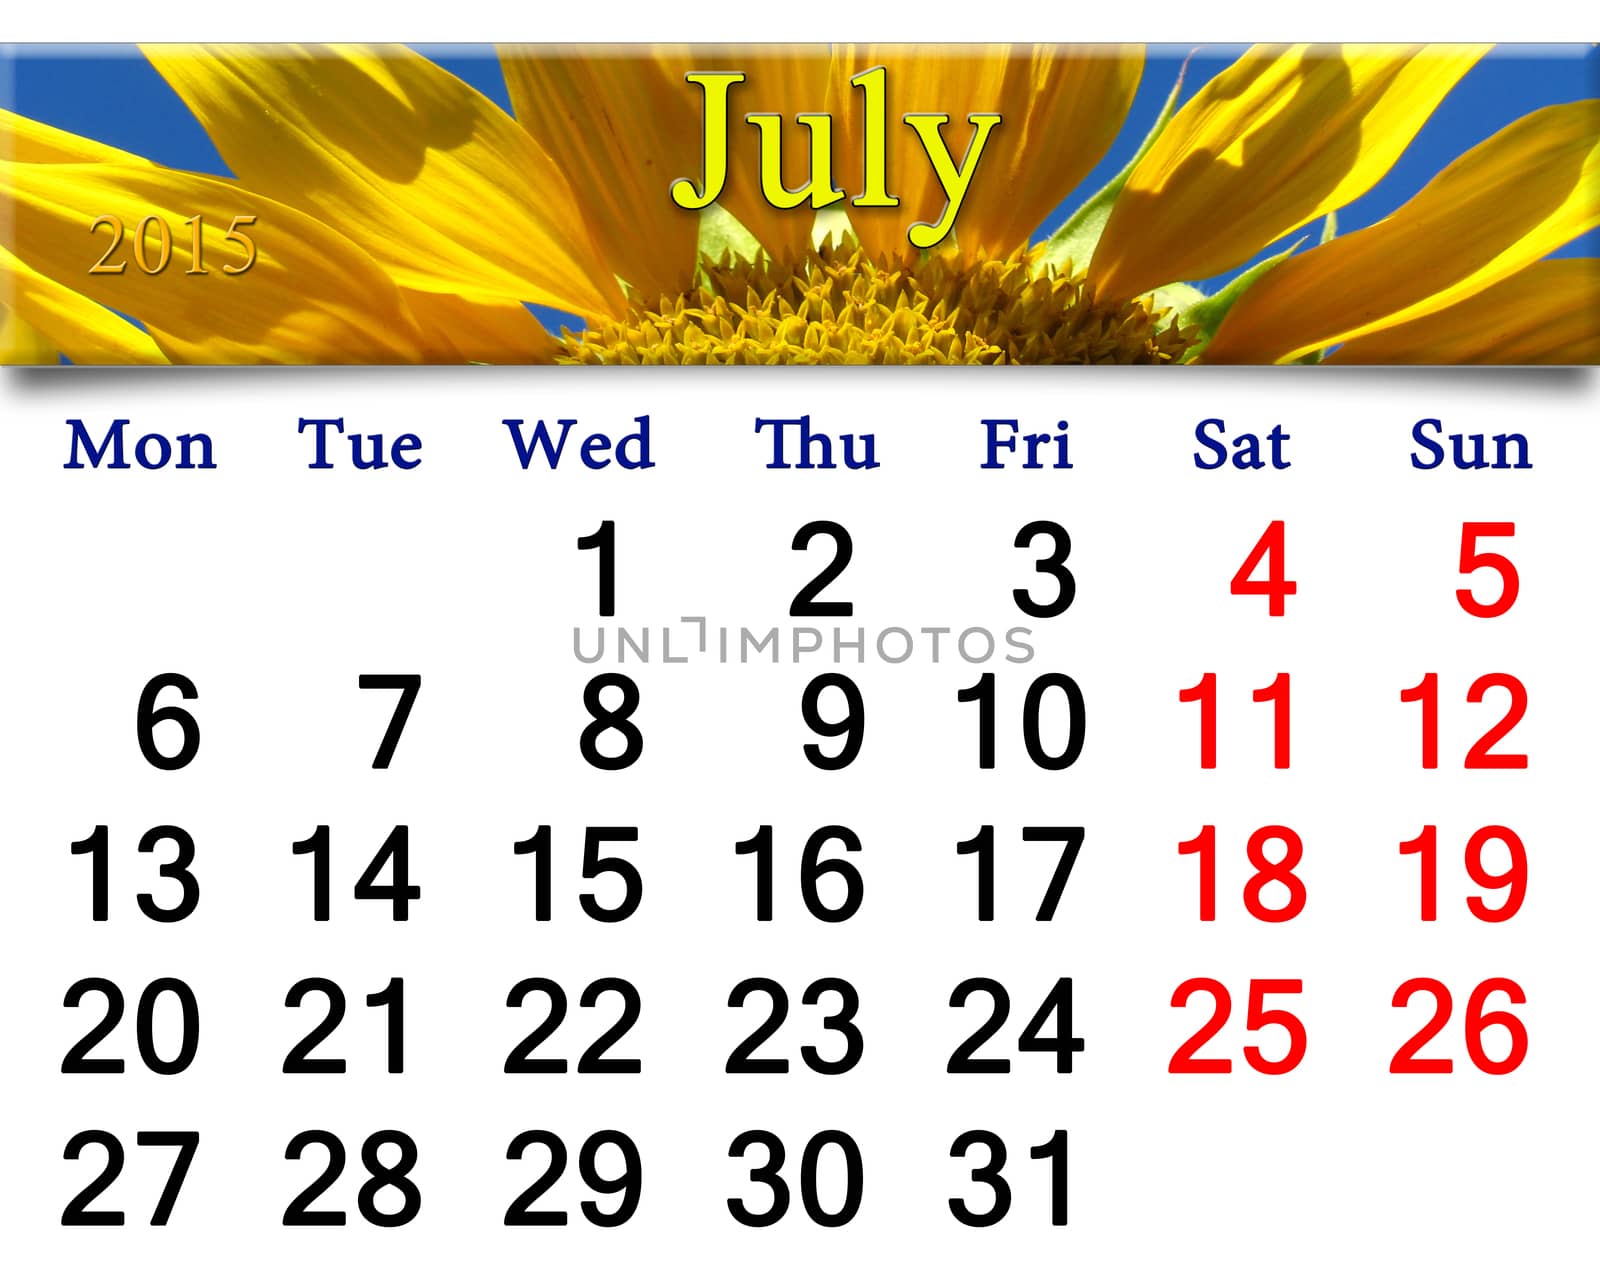 office calendar for 2015 year with big yellow sunflower